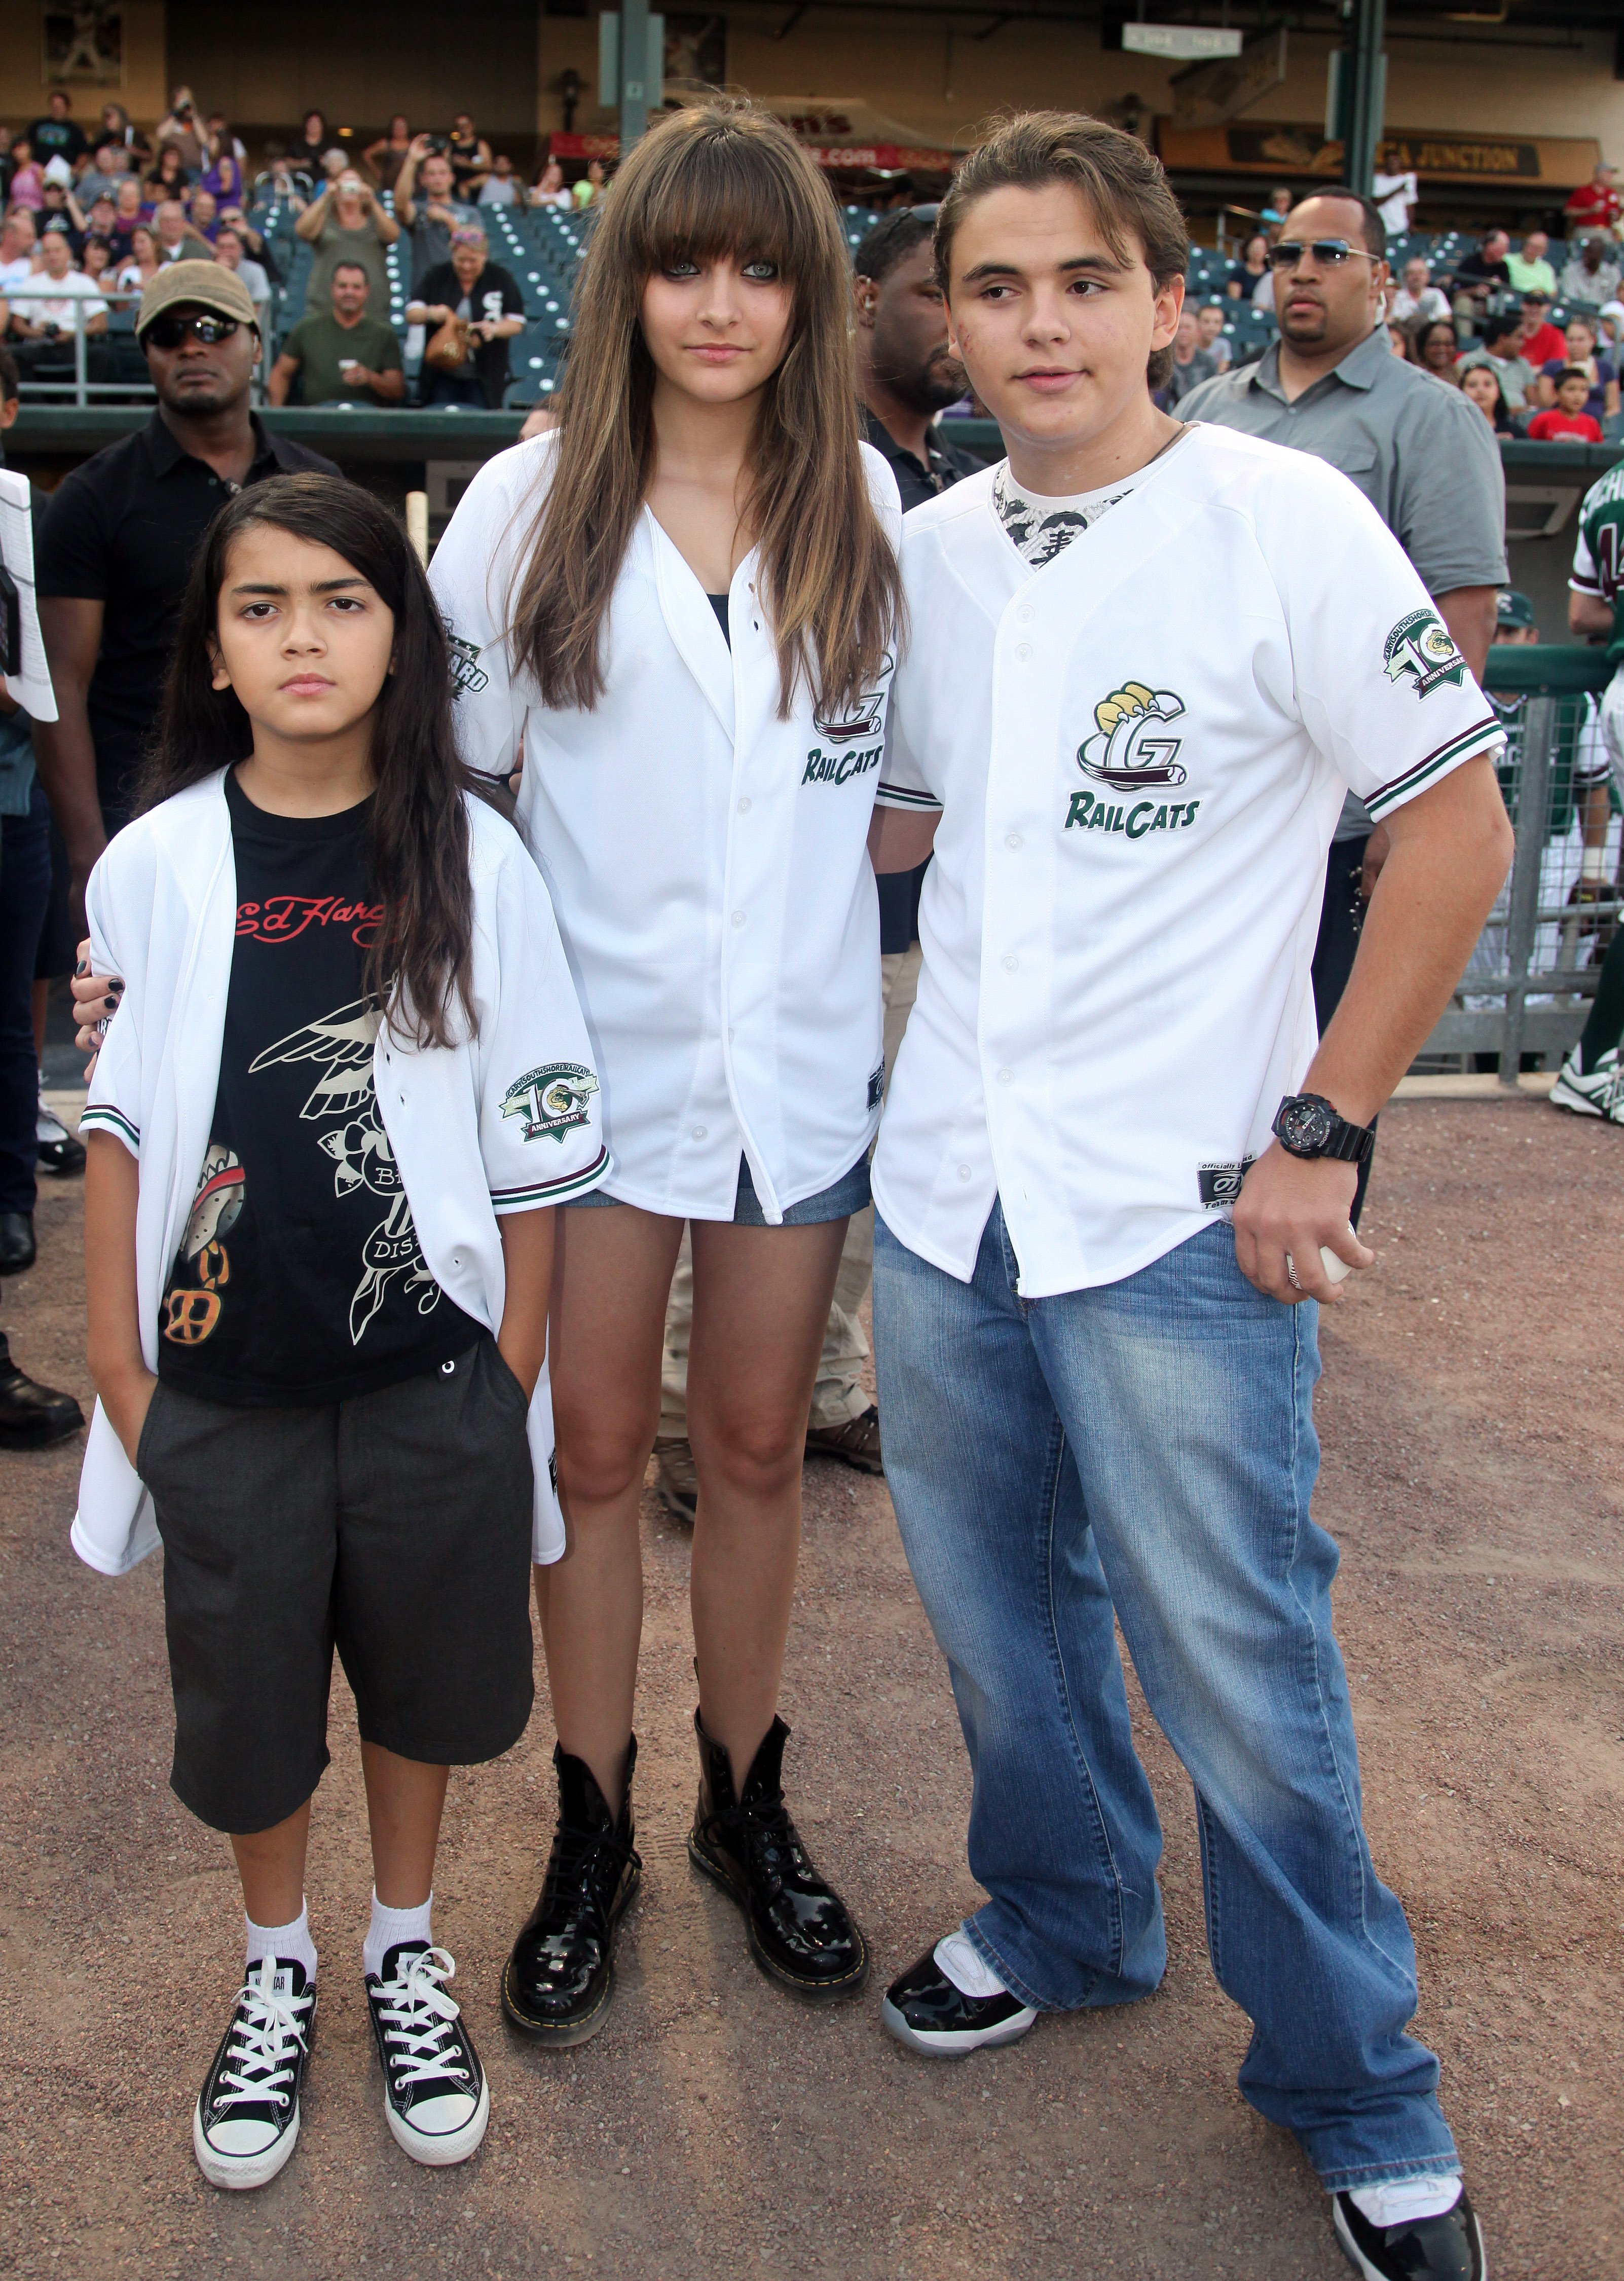 Blanket, Paris, and Prince Jackson at the  St. Paul Saints vs. The Gary SouthShore RailCats baseball game in Gary, Indiana on August 30, 2012 | Source: Getty Images